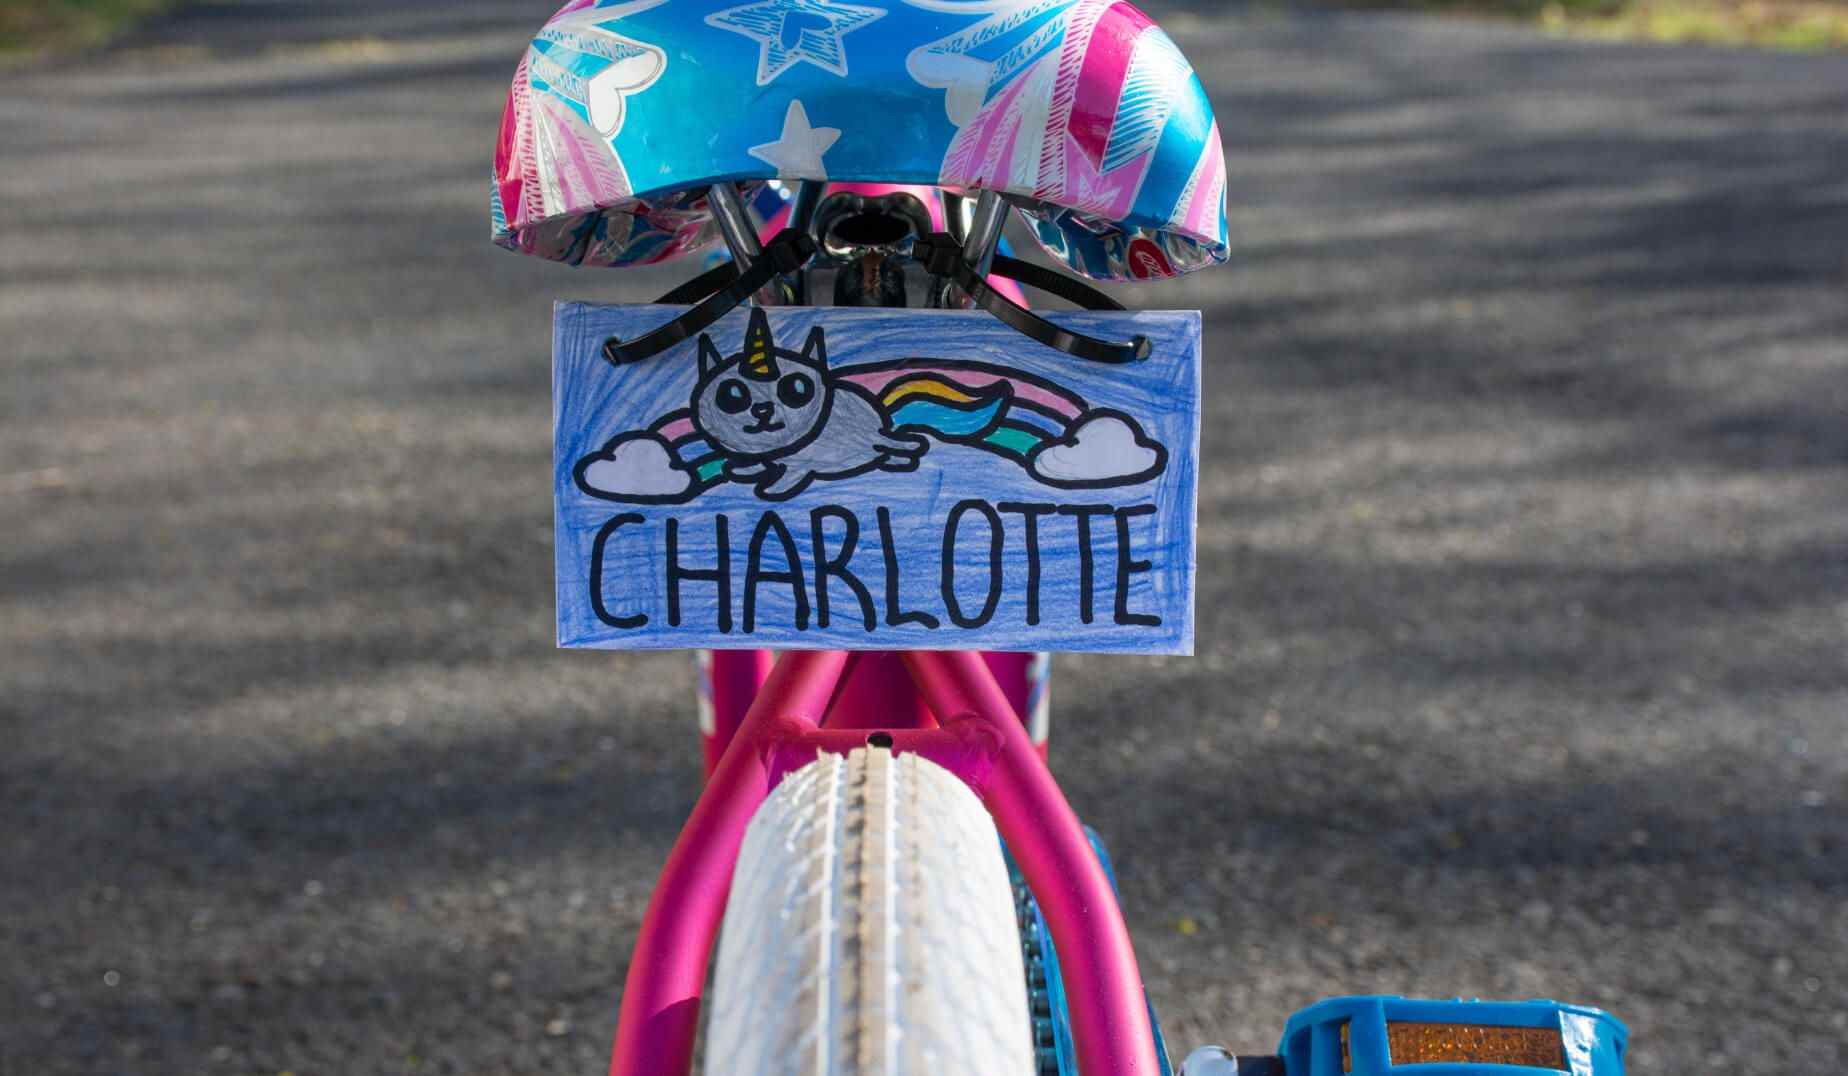 license plate attached to the back of a bicycle